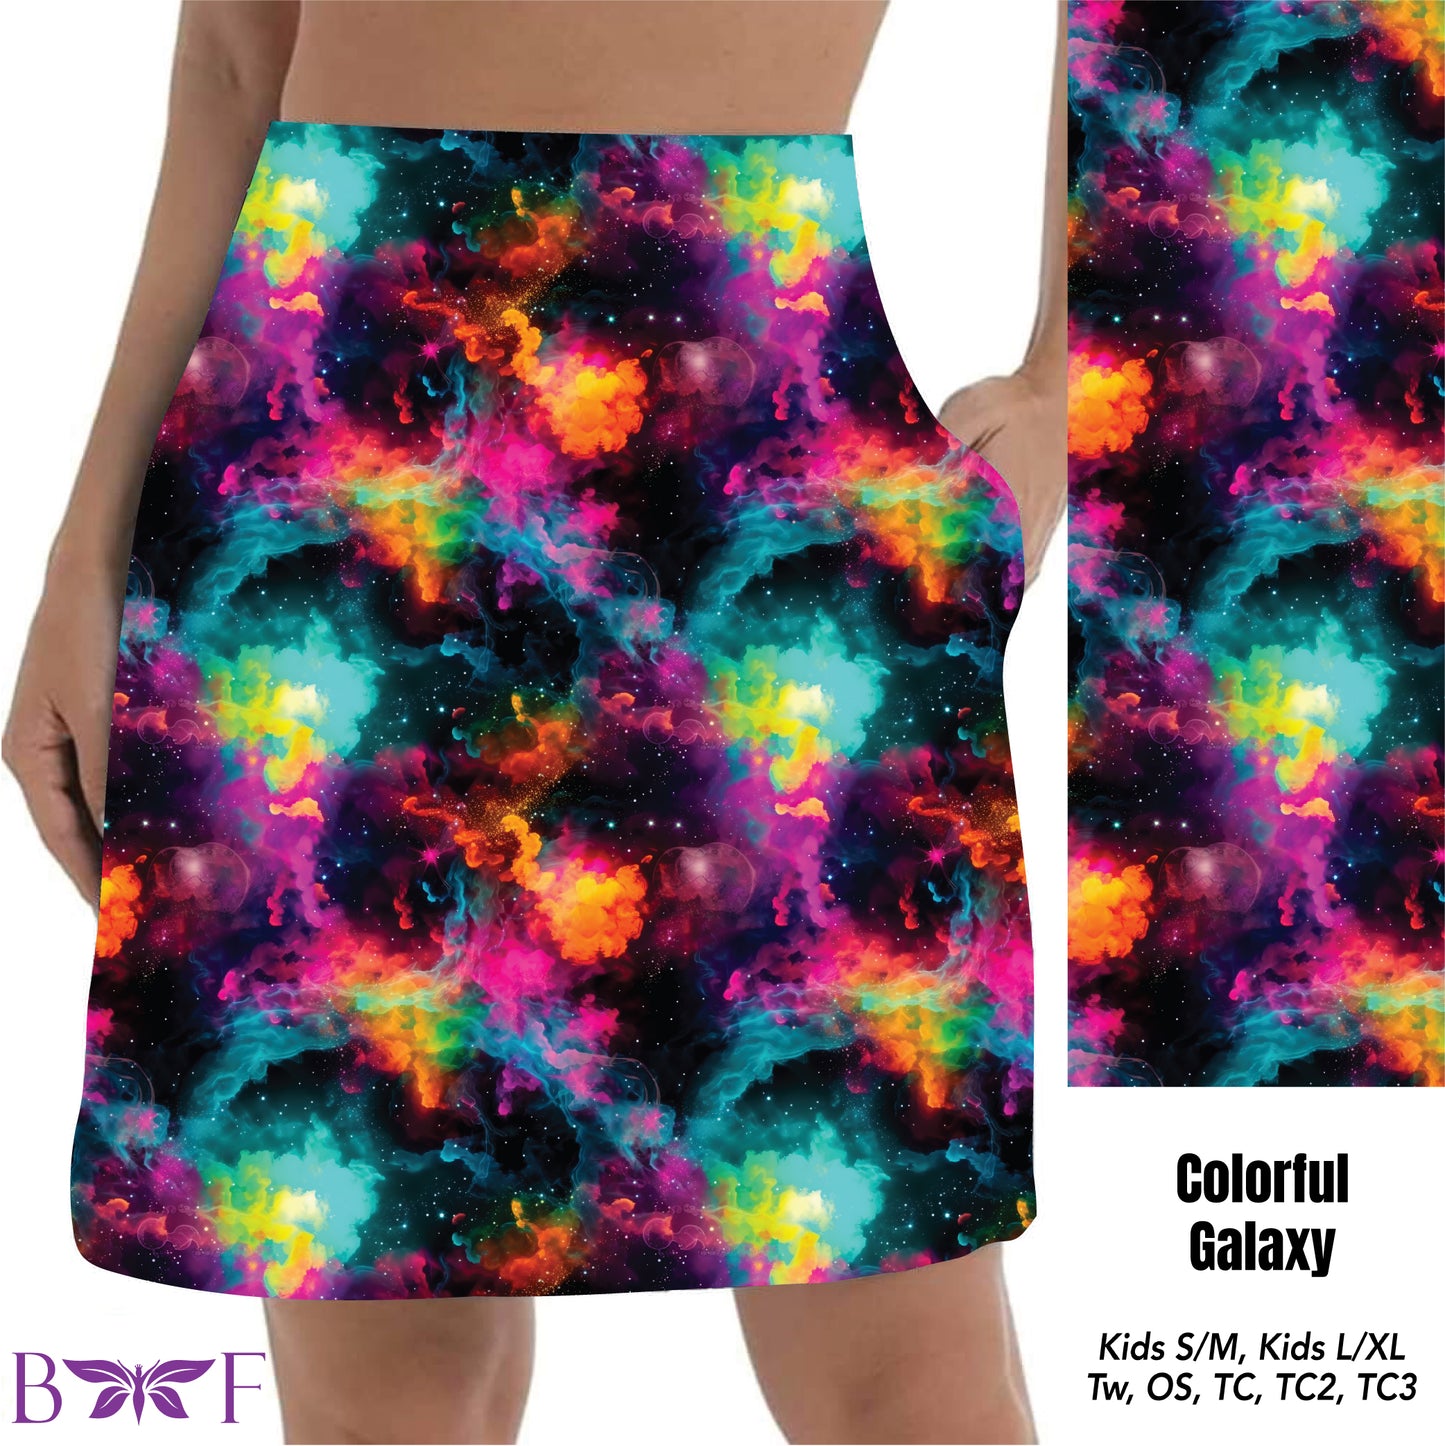 Colorful Galaxy Skorts with pockets